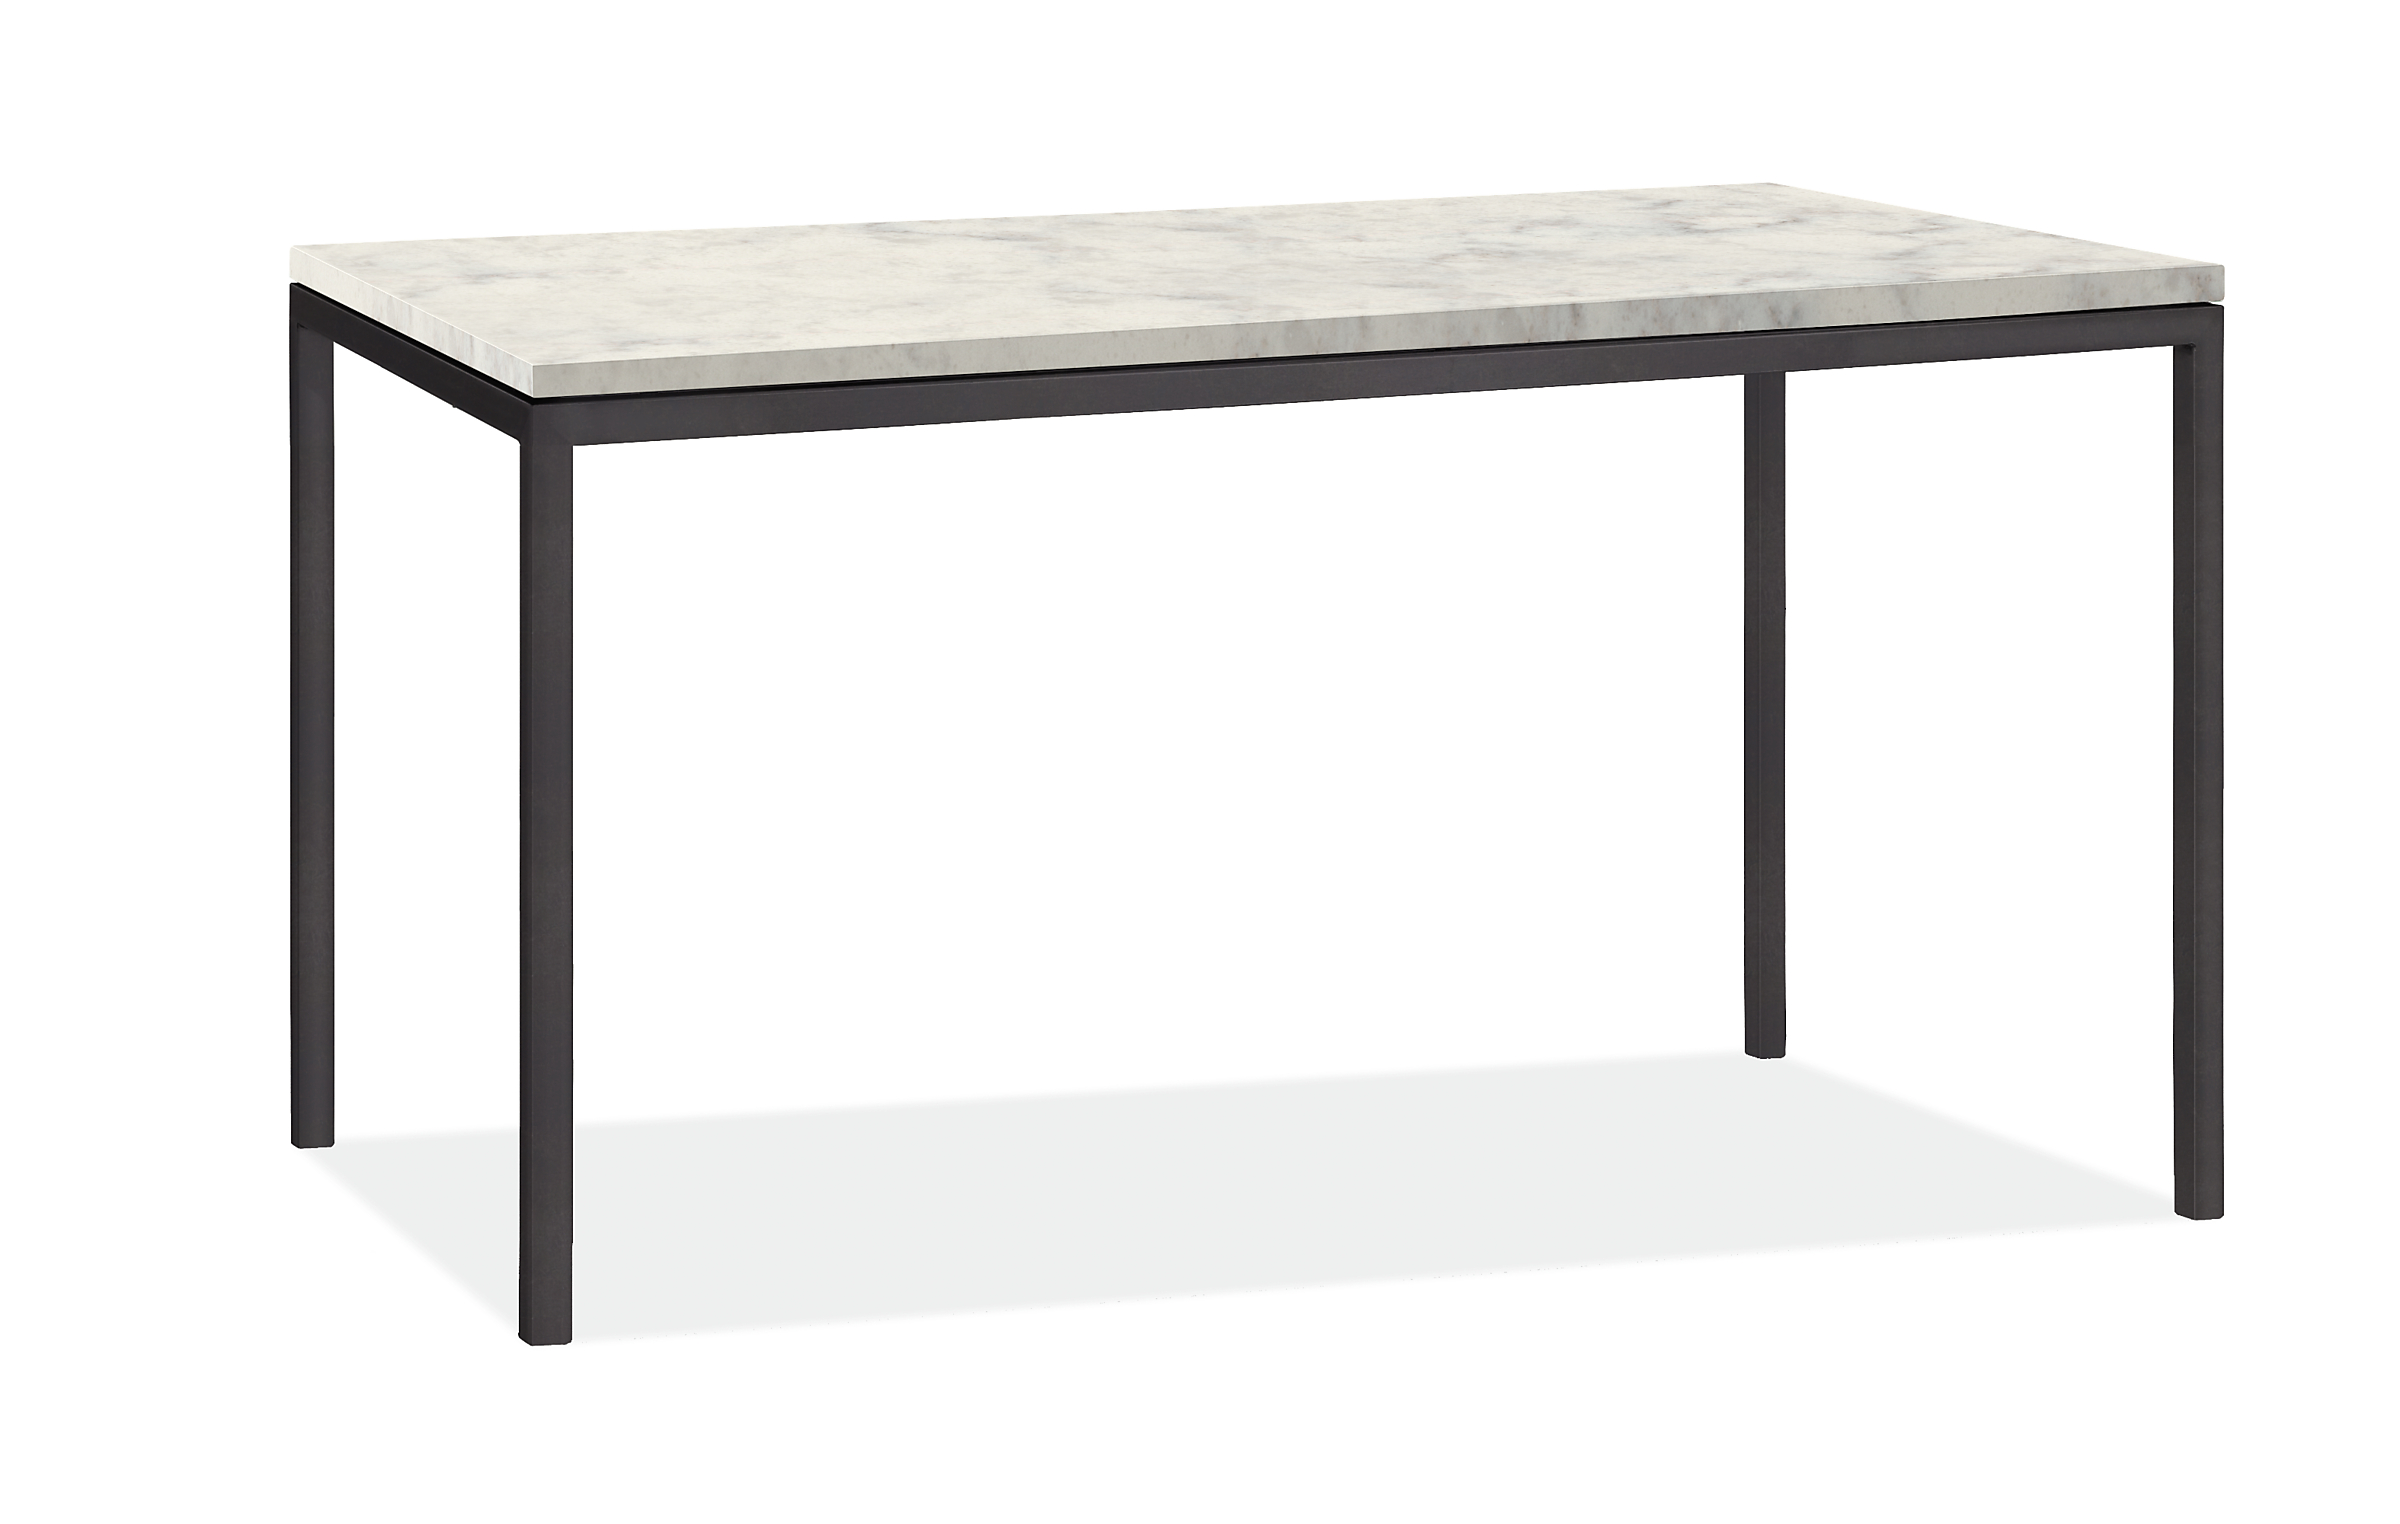 Parsons 48w 24d Table with 1" Leg